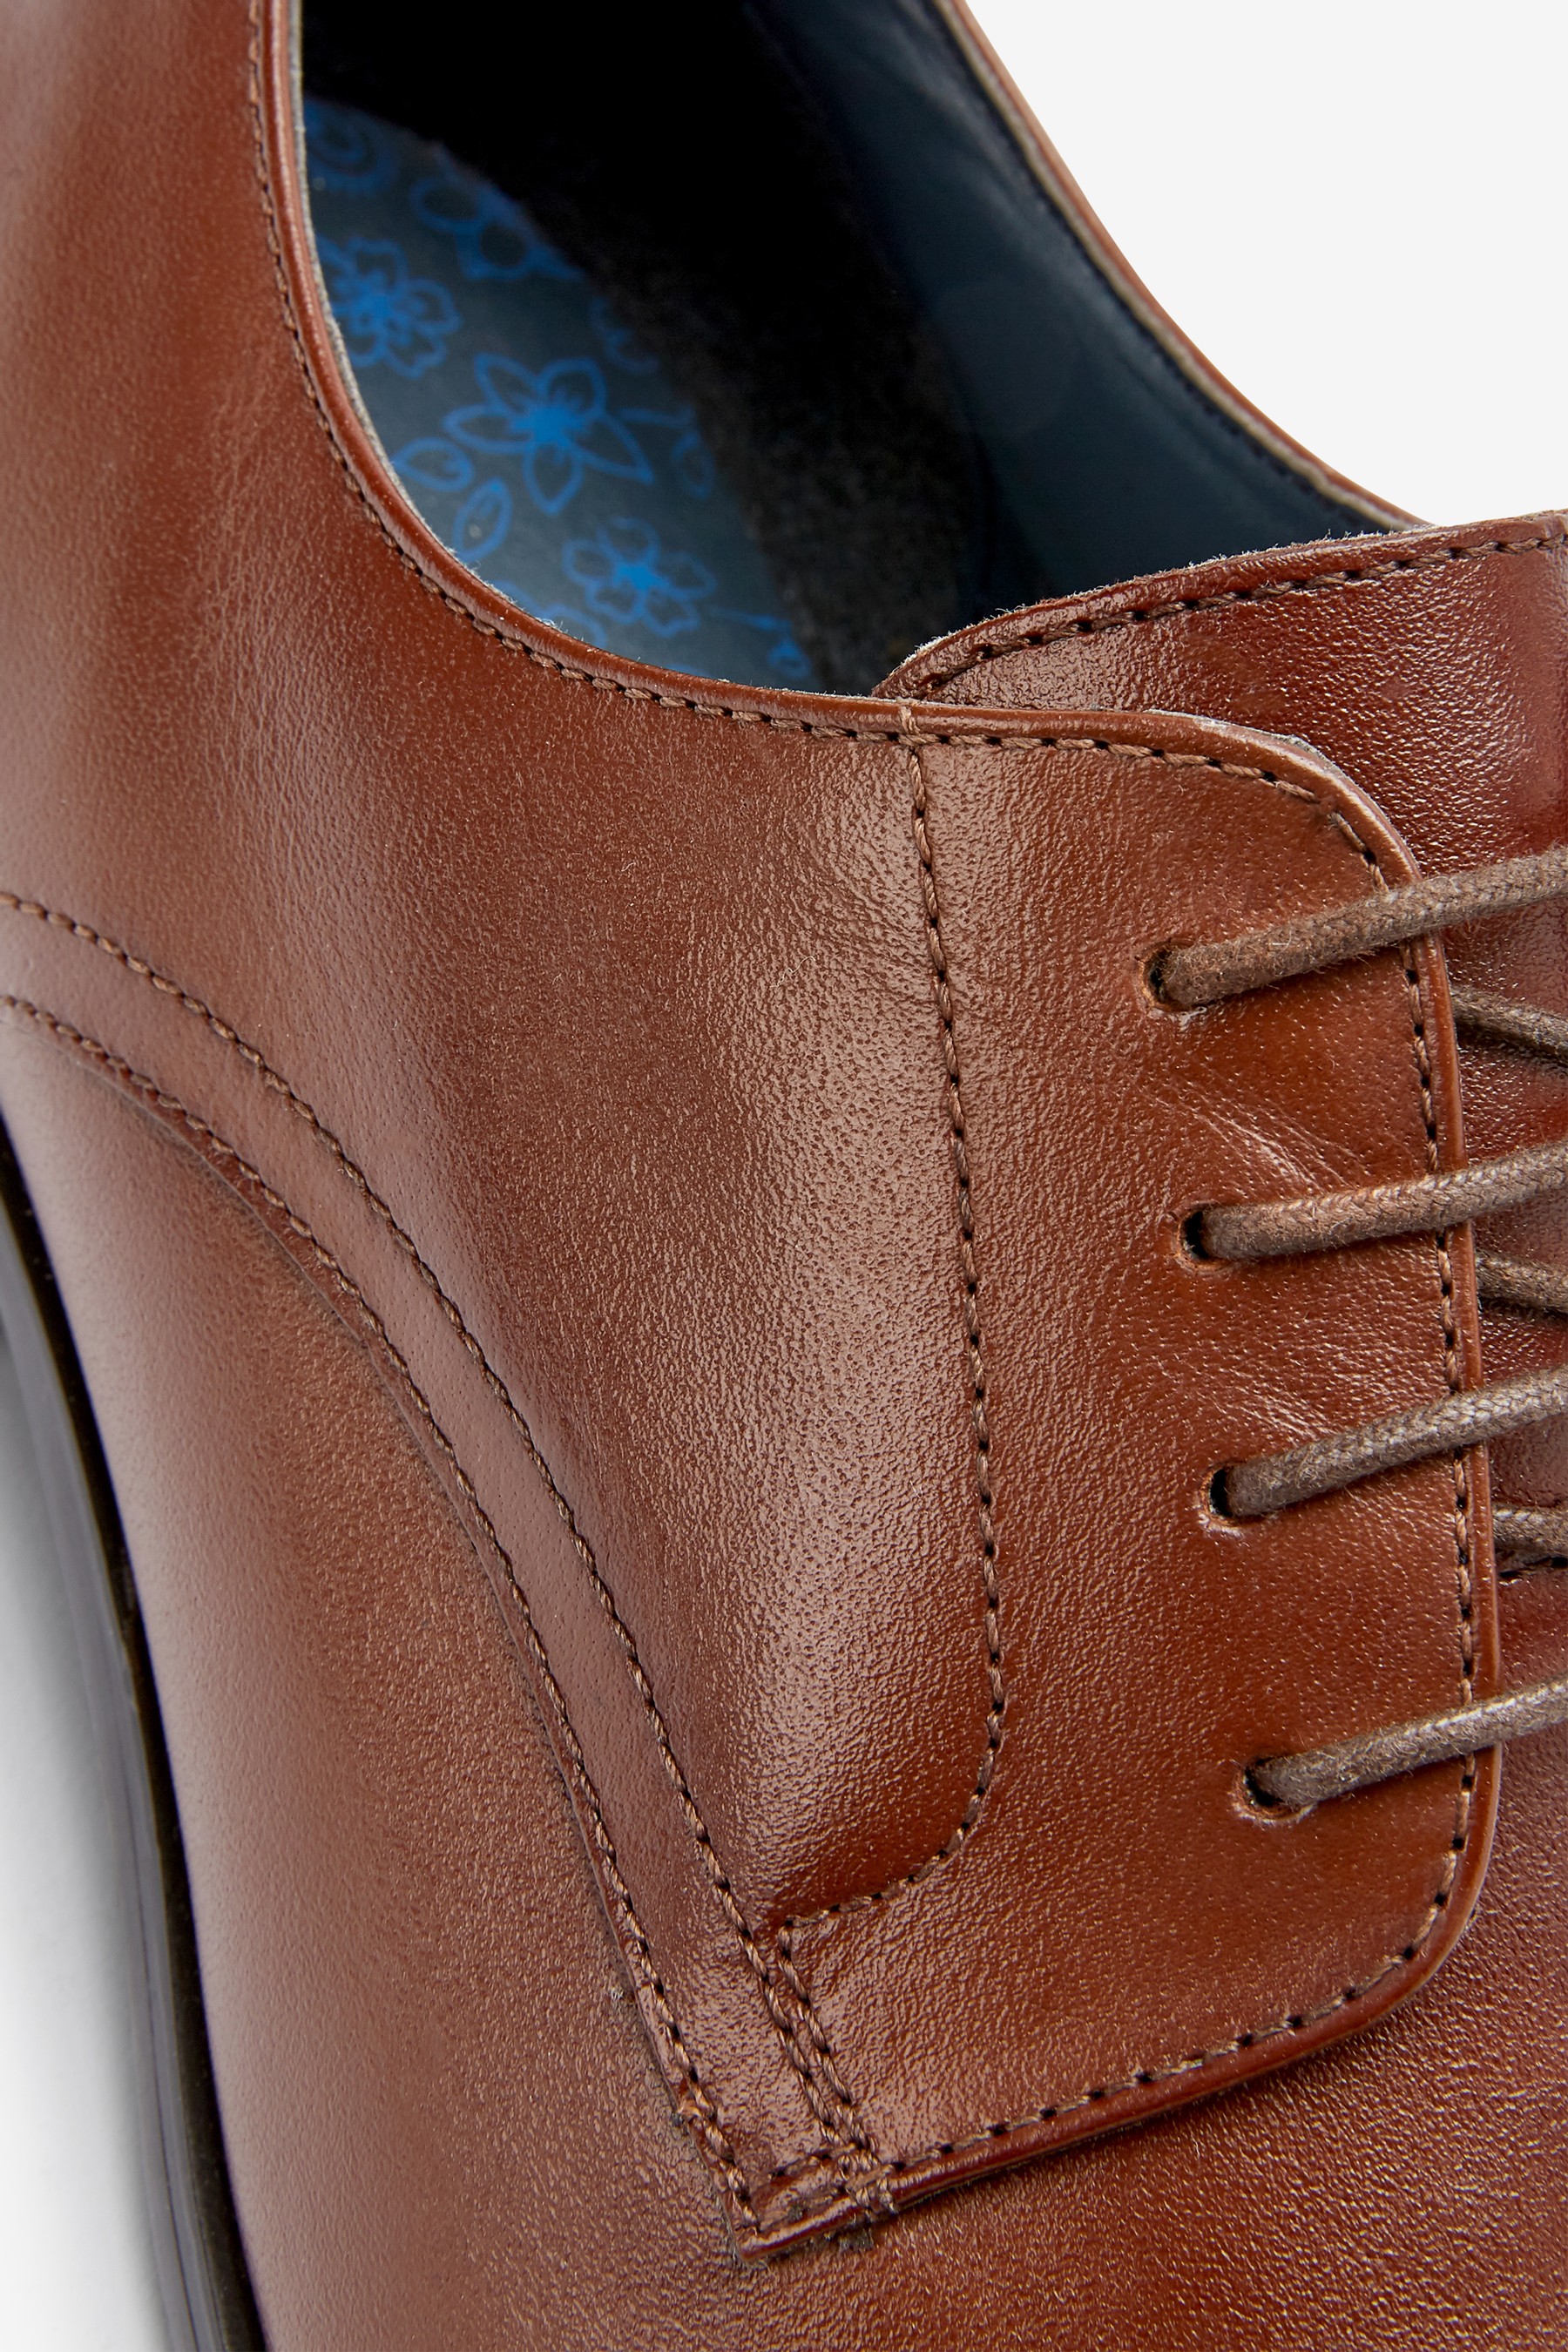 Round Toe Leather Derby Shoes